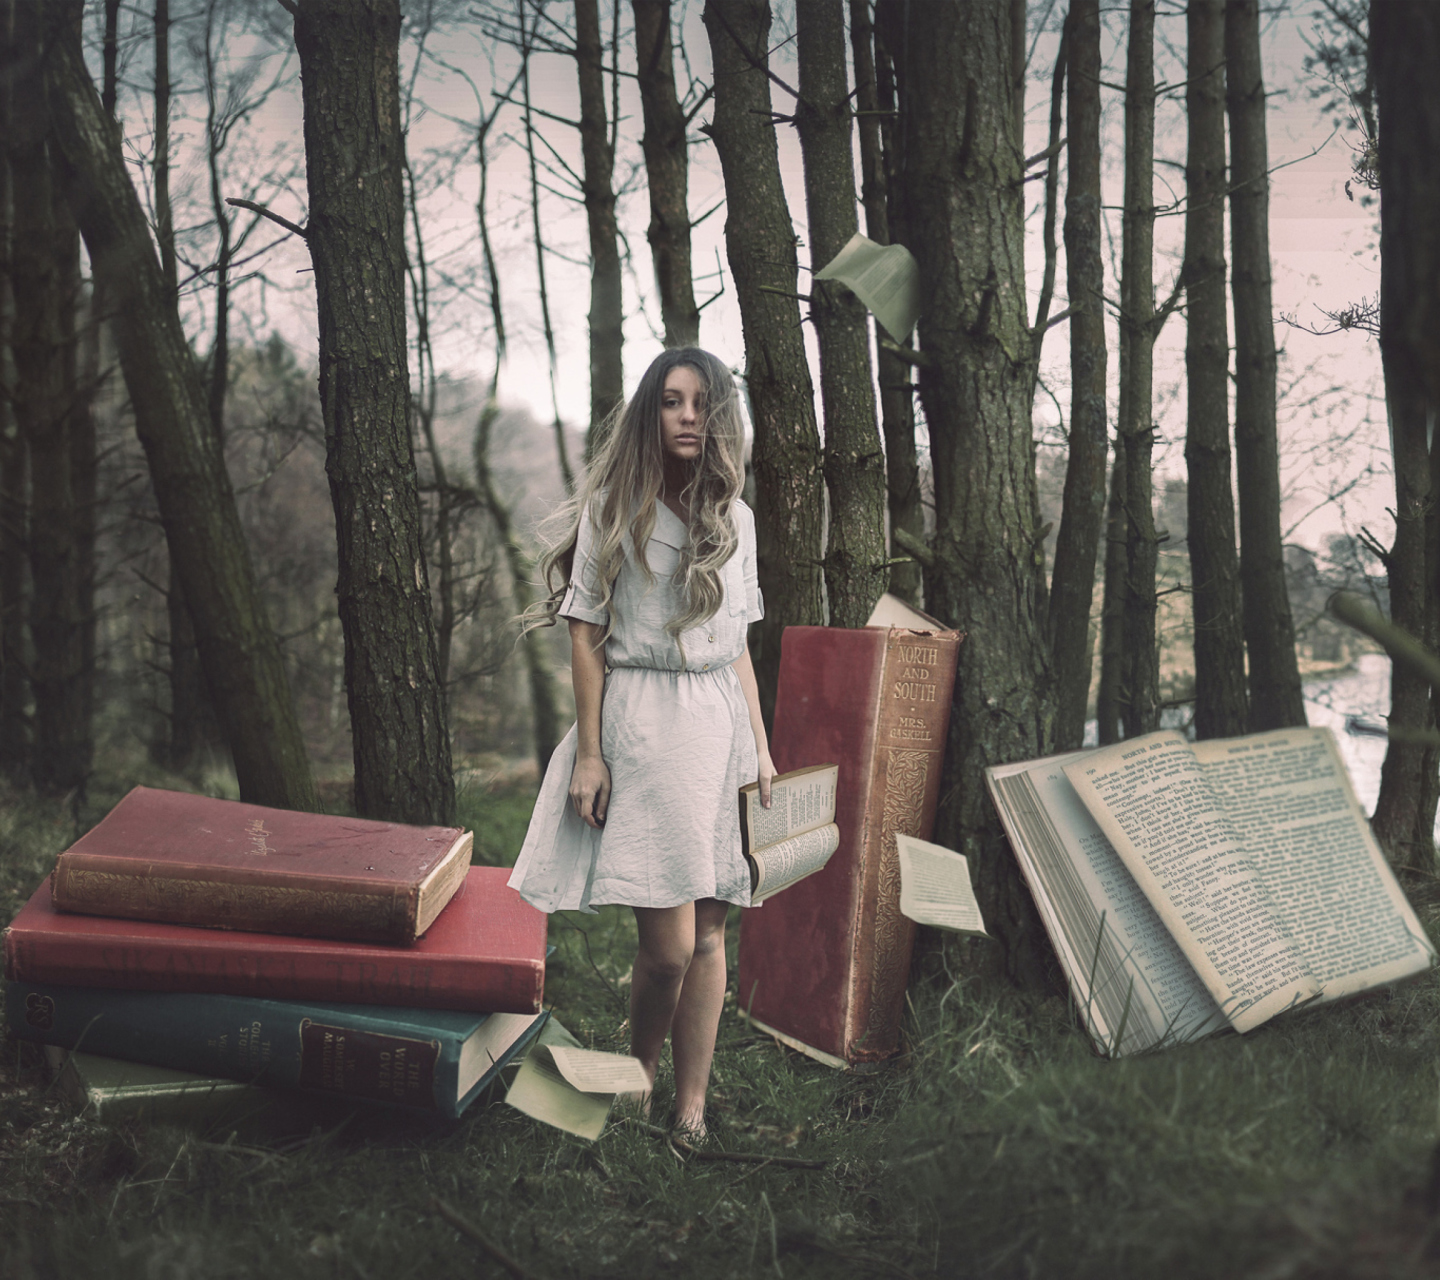 Обои Forest Nymph Surrounded By Books 1440x1280